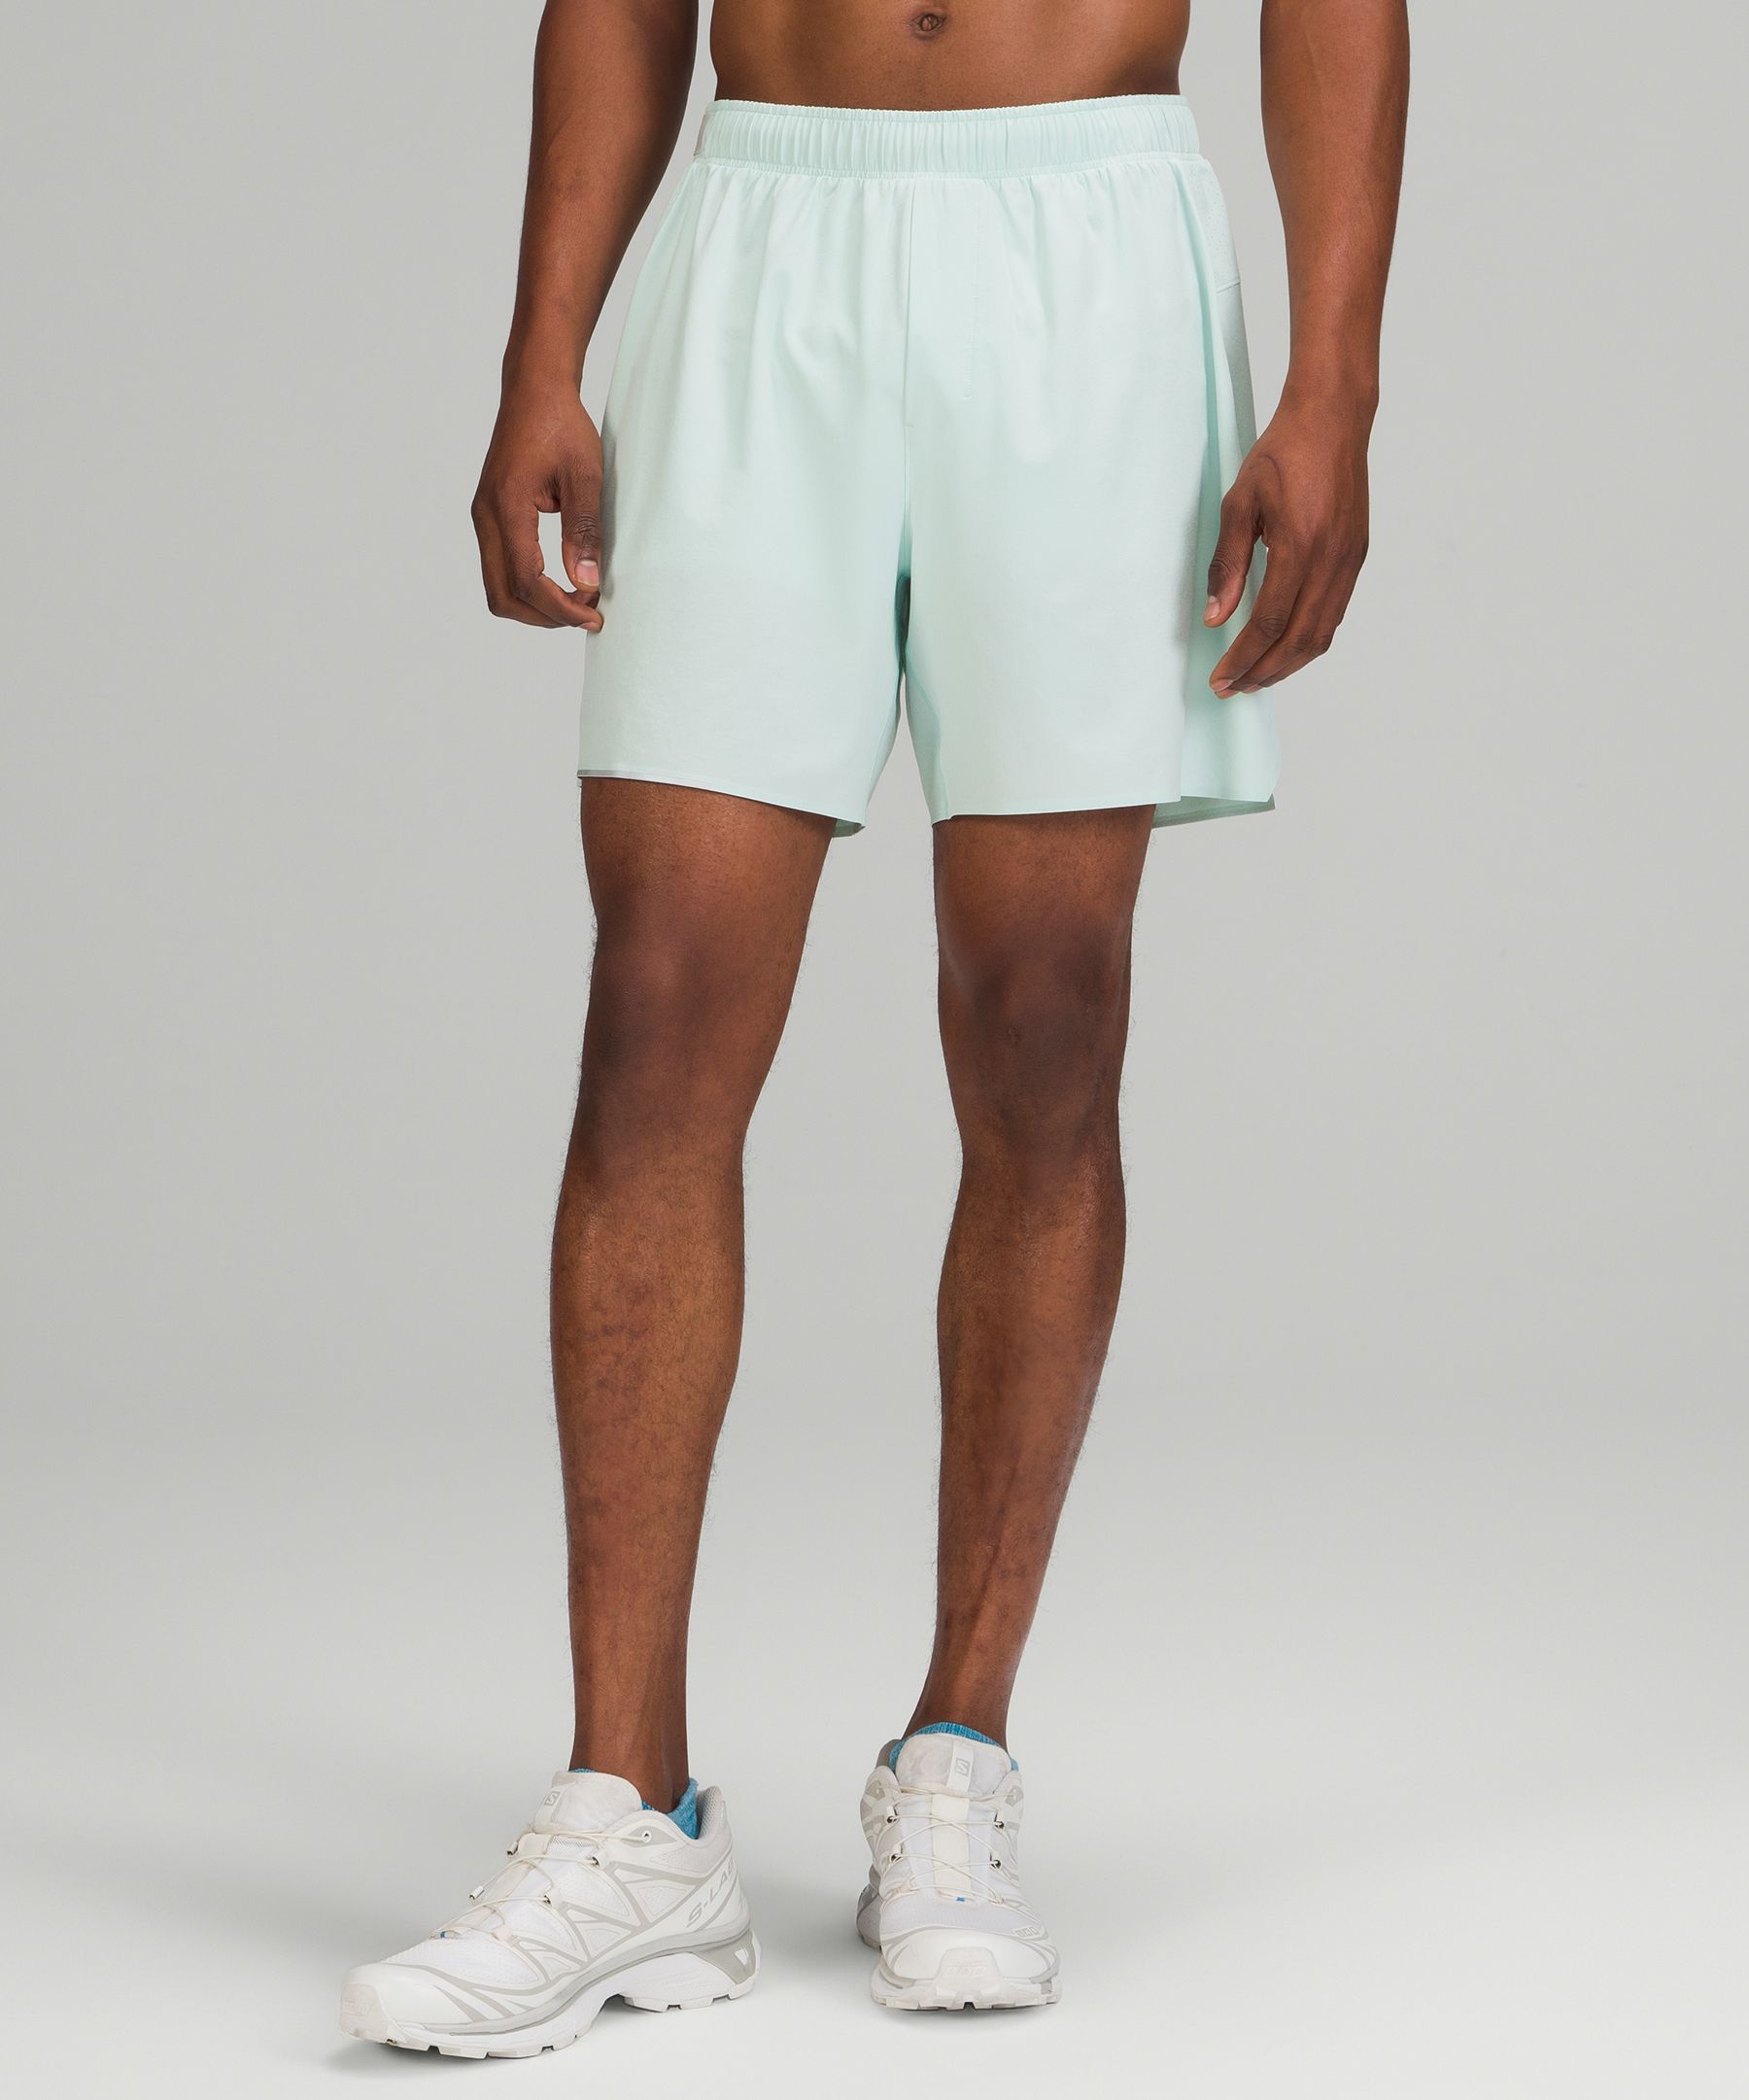 Lululemon Surge Lined Shorts 6" In Green